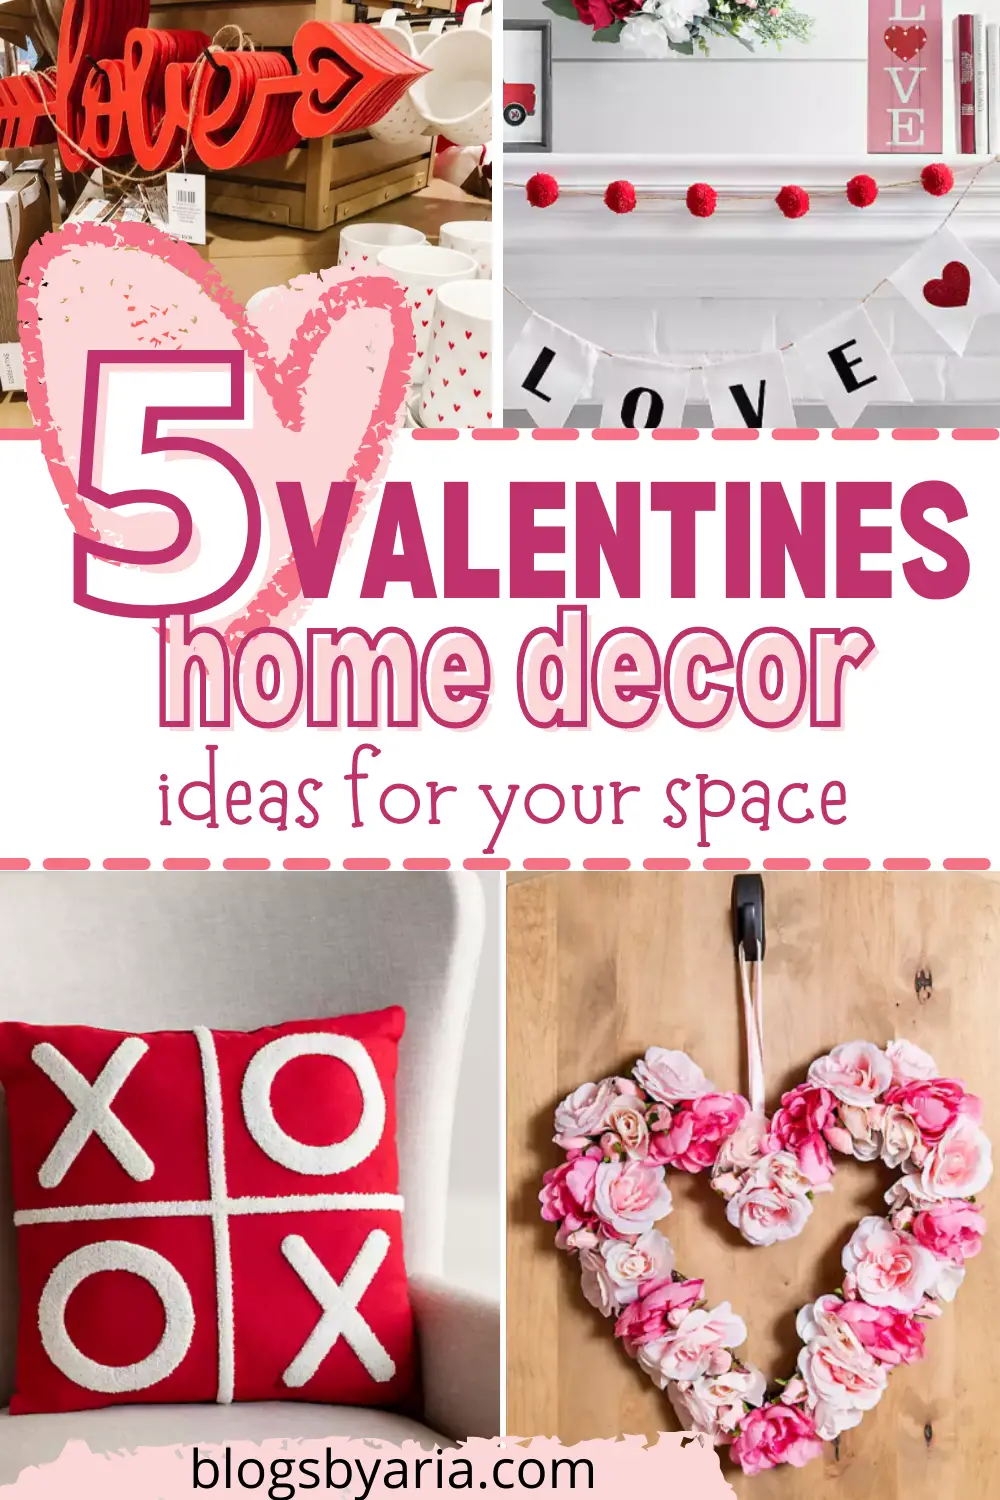 Valentines home decor ideas for your space